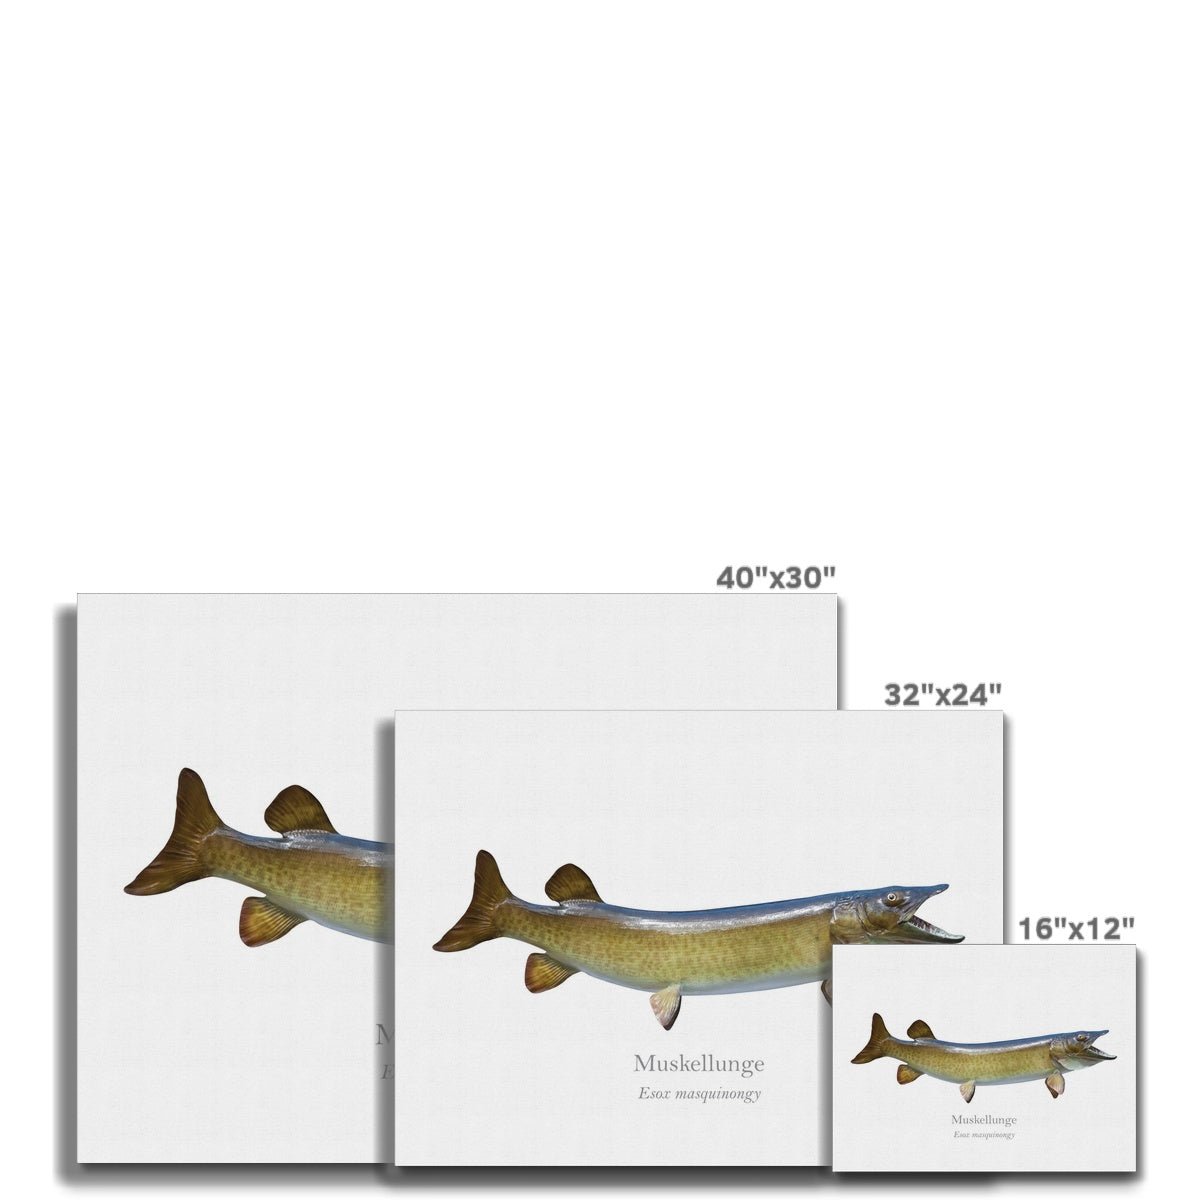 Muskellunge - Canvas Print - With Scientific Name - madfishlab.com